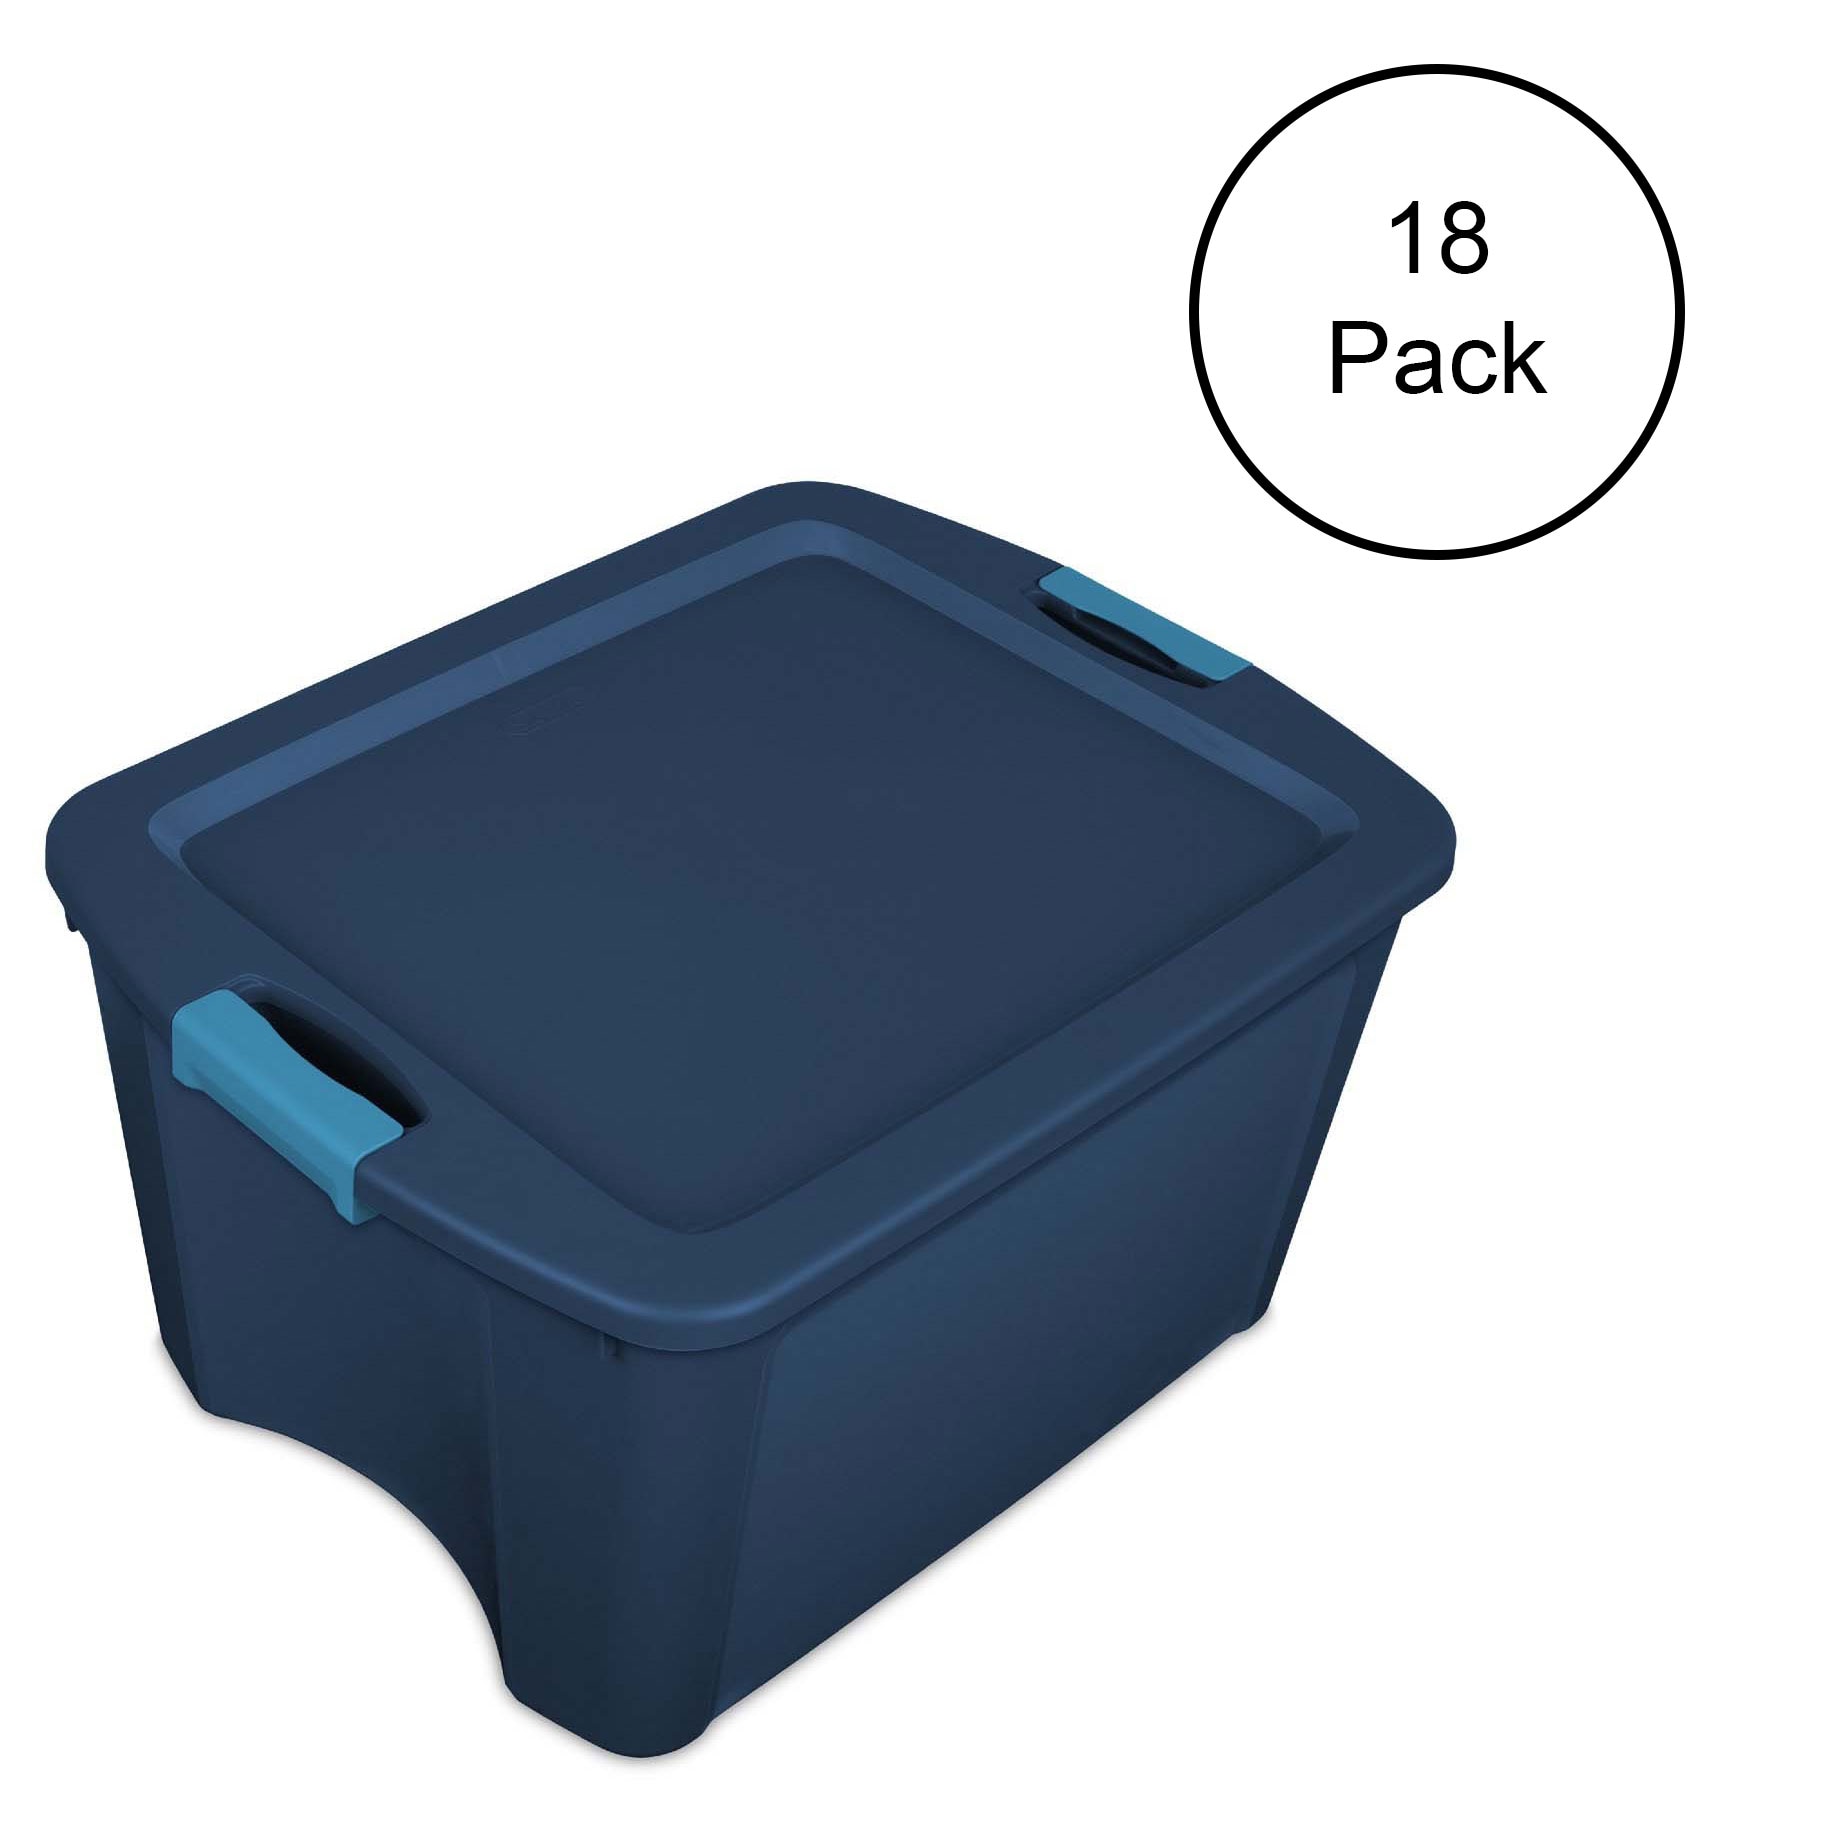 Centrex Rugged Tote Medium 18-Gallons (72-Quart) Metallic Blue Heavy Duty  Tote with Standard Snap Lid in the Plastic Storage Containers department at